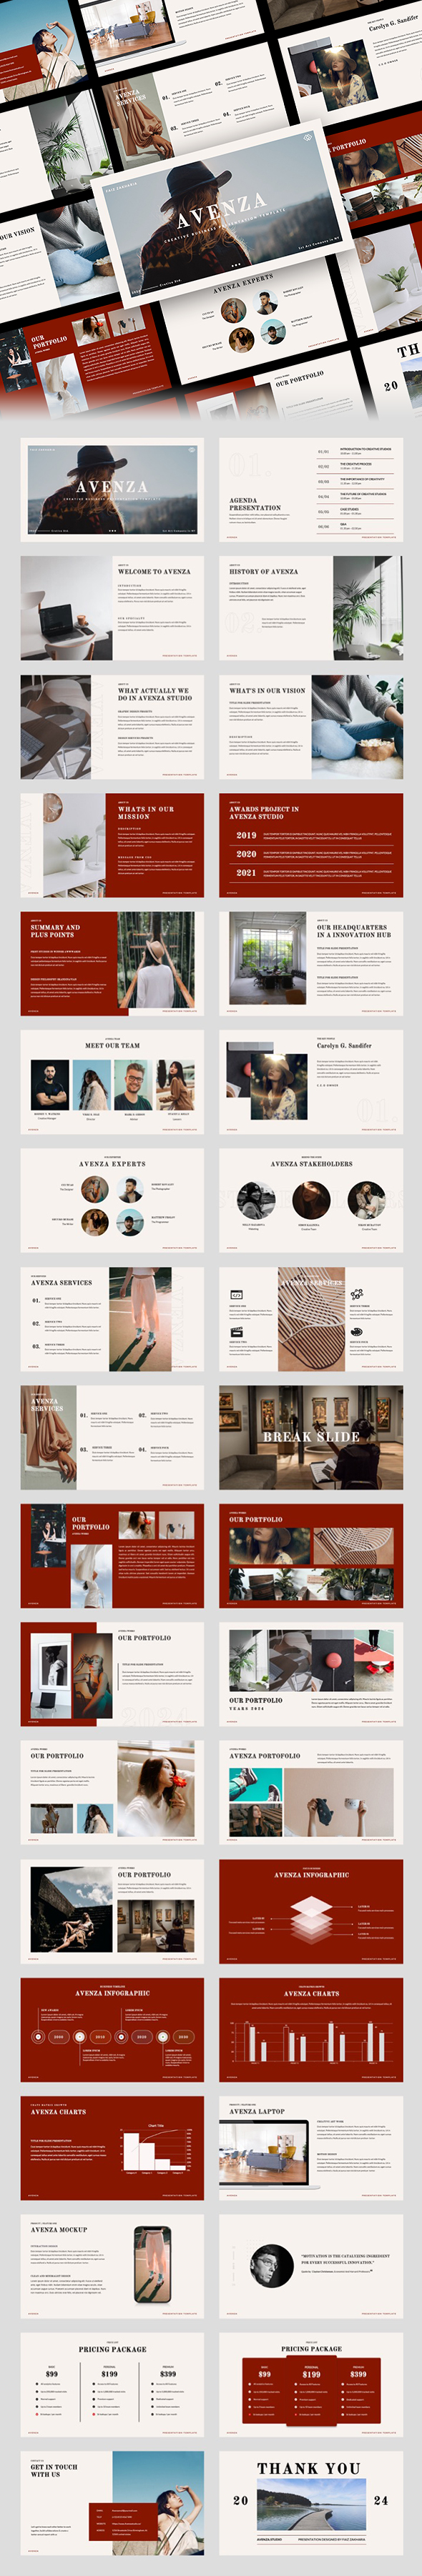 Avenza - Creative Business PowerPoint Template